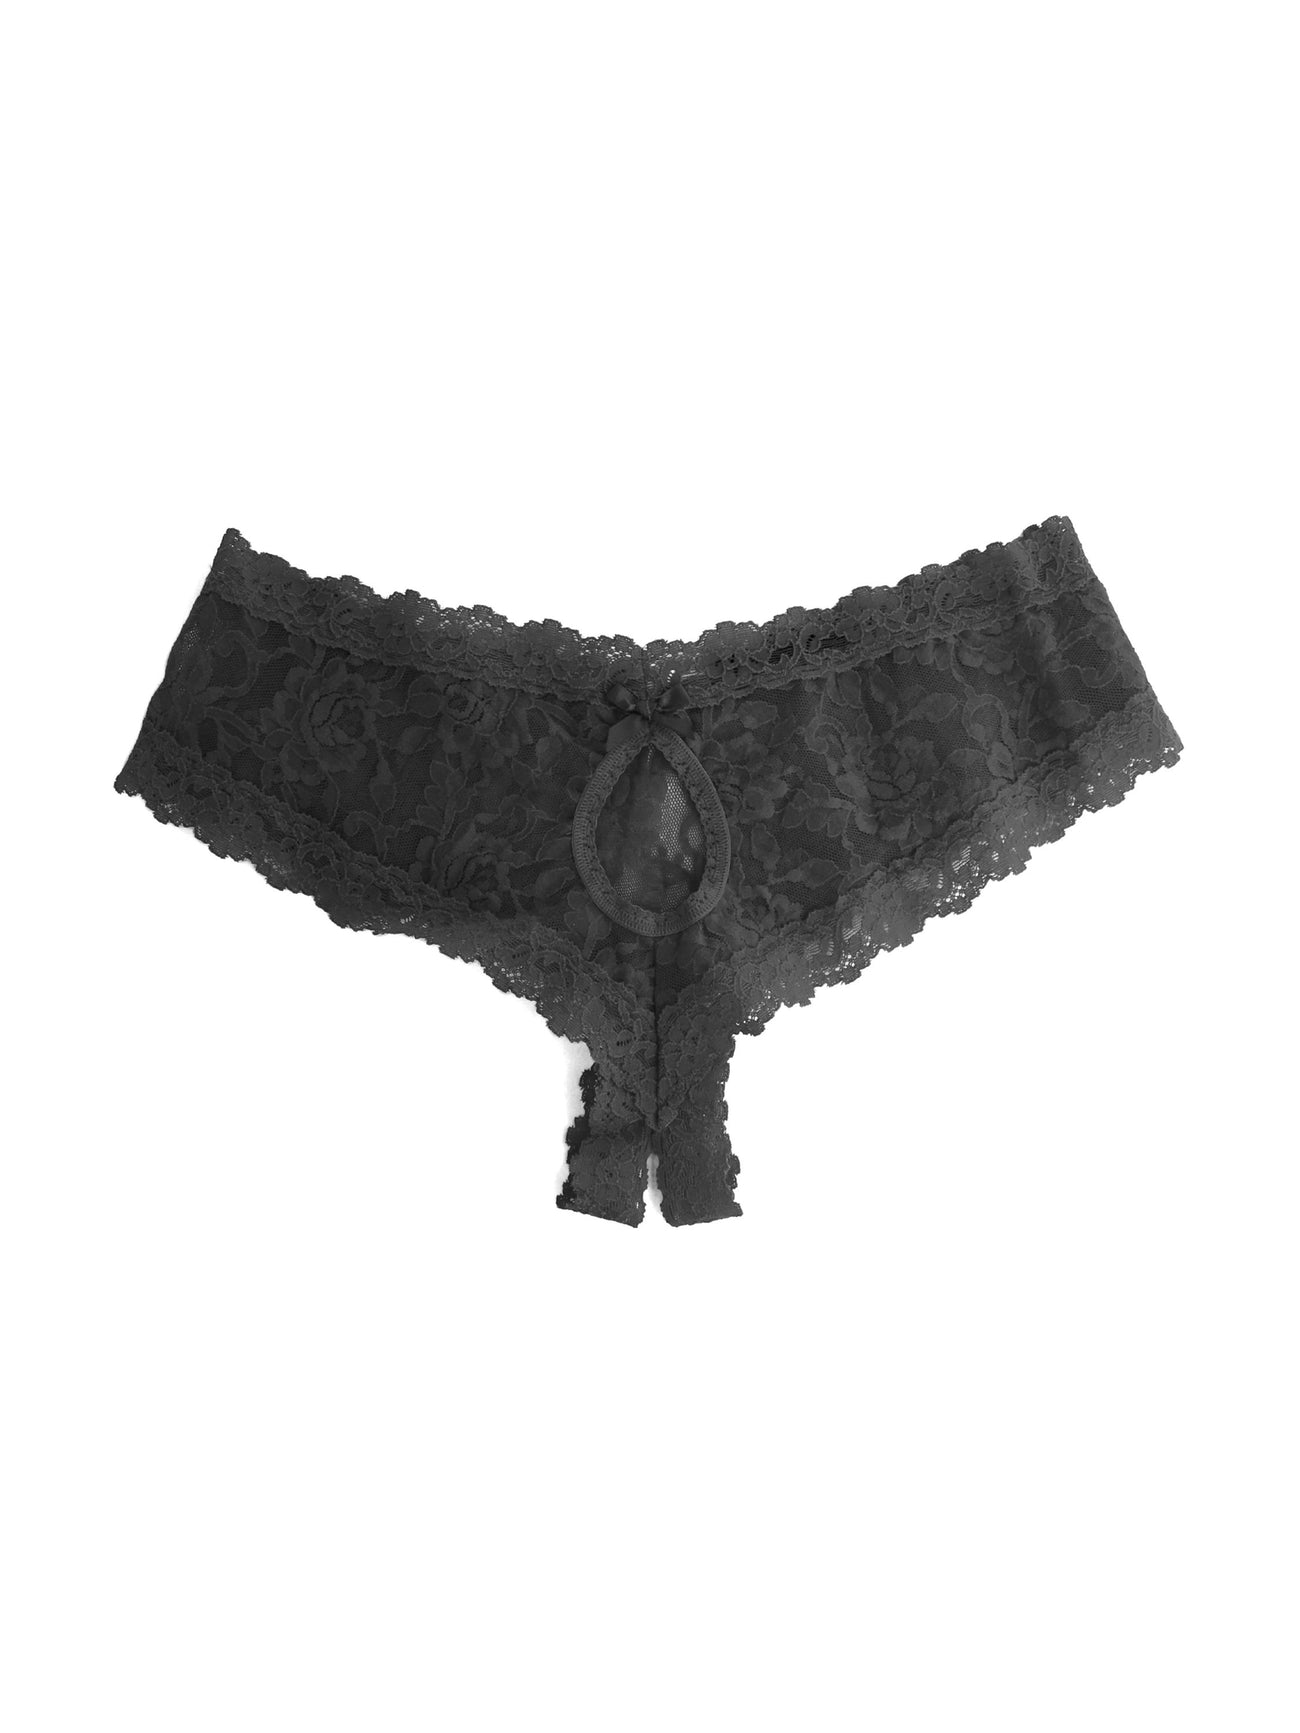 LACE CROTCHLESS CHEEKY HIPSTER - Expect Lace